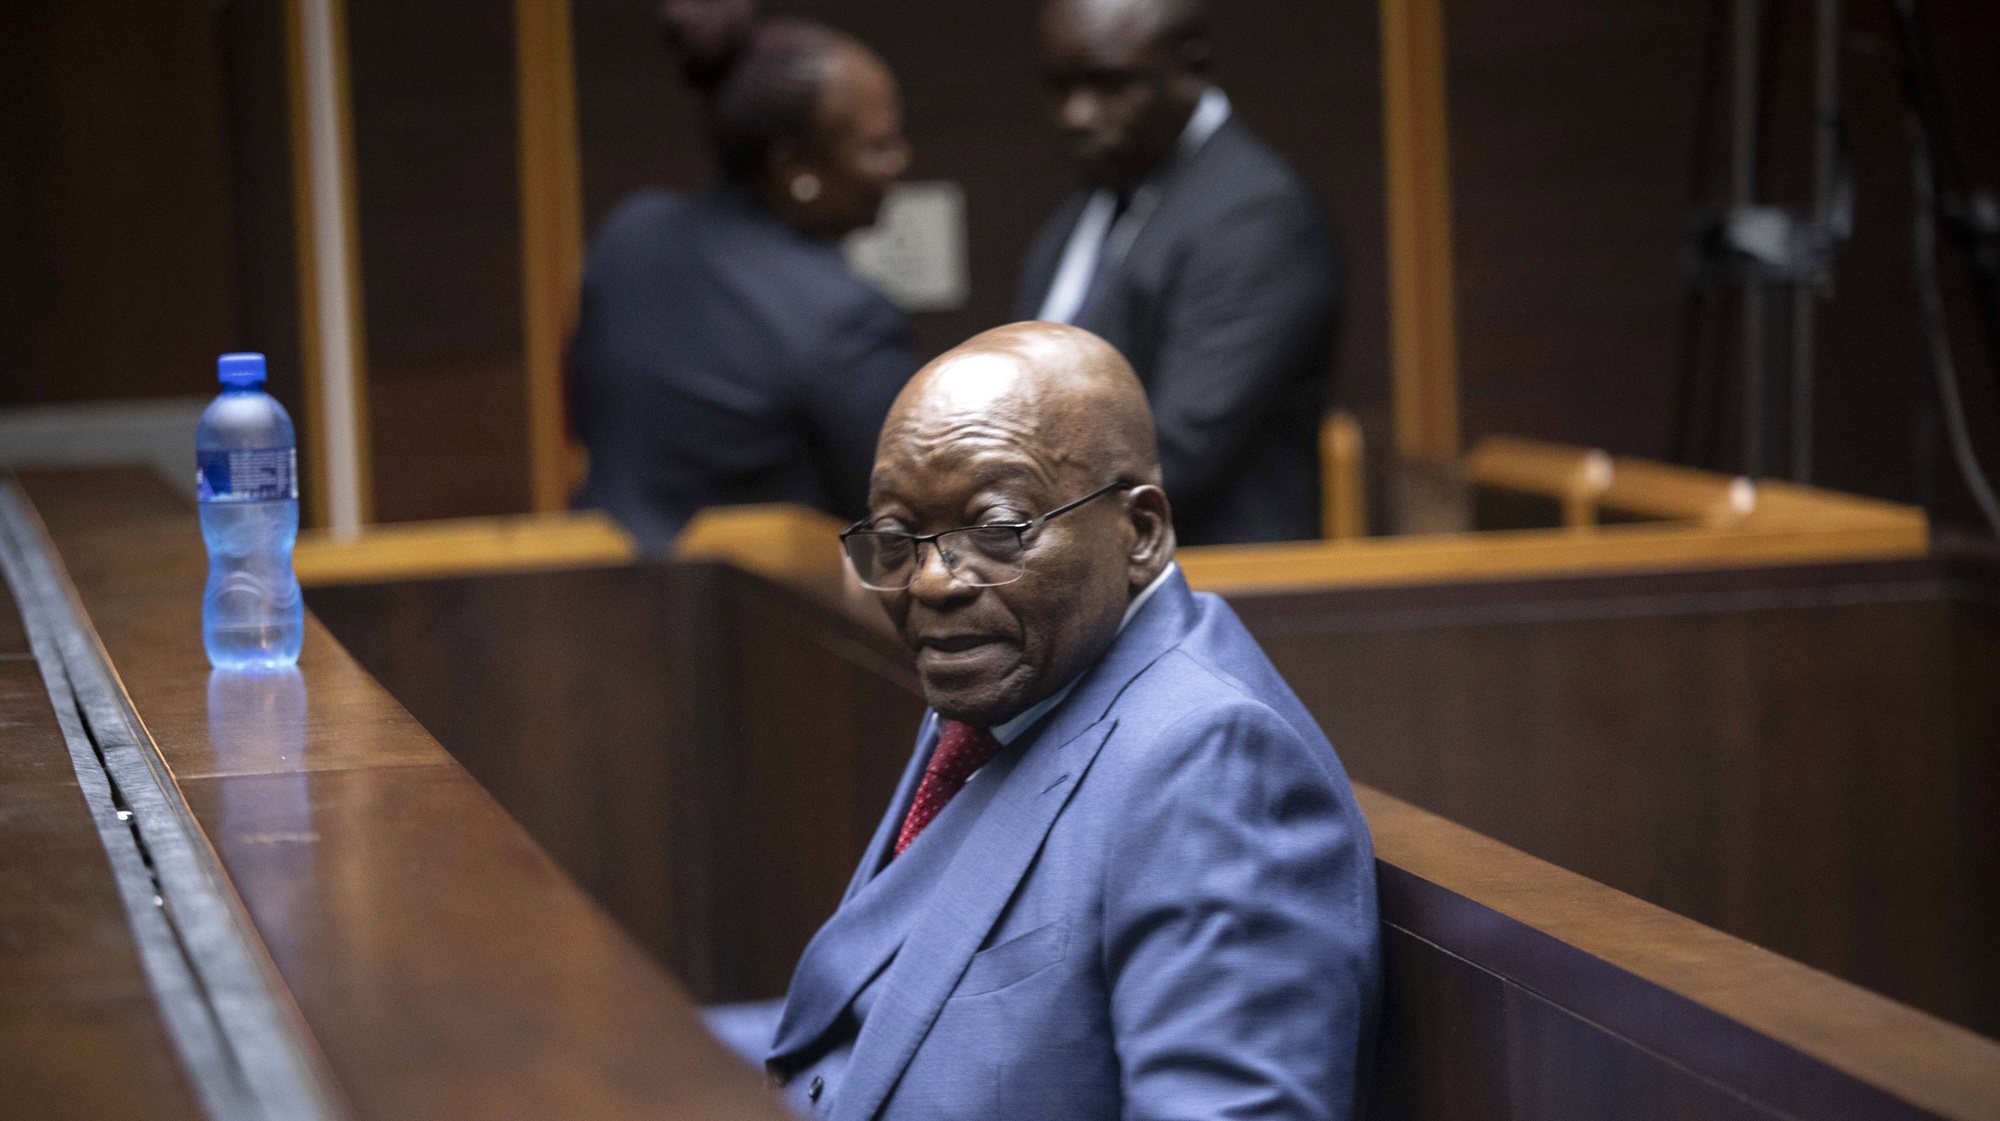 epa10576526 Former South African President Jacob Zuma appears at the Pietermaritzburg High Court in an arms deal corruption case, in Pietermaritzburg, South Africa, 17 April 2023. Former President Zuma stands accused of taking kickbacks before he became president from a 51 billion South African Rand (3.4 billion US dollar) purchase of fighter jets, patrol boats and military equipment manufactured by five European firms, including French defense company Thales.  EPA/KIM LUDBROOK / POOL